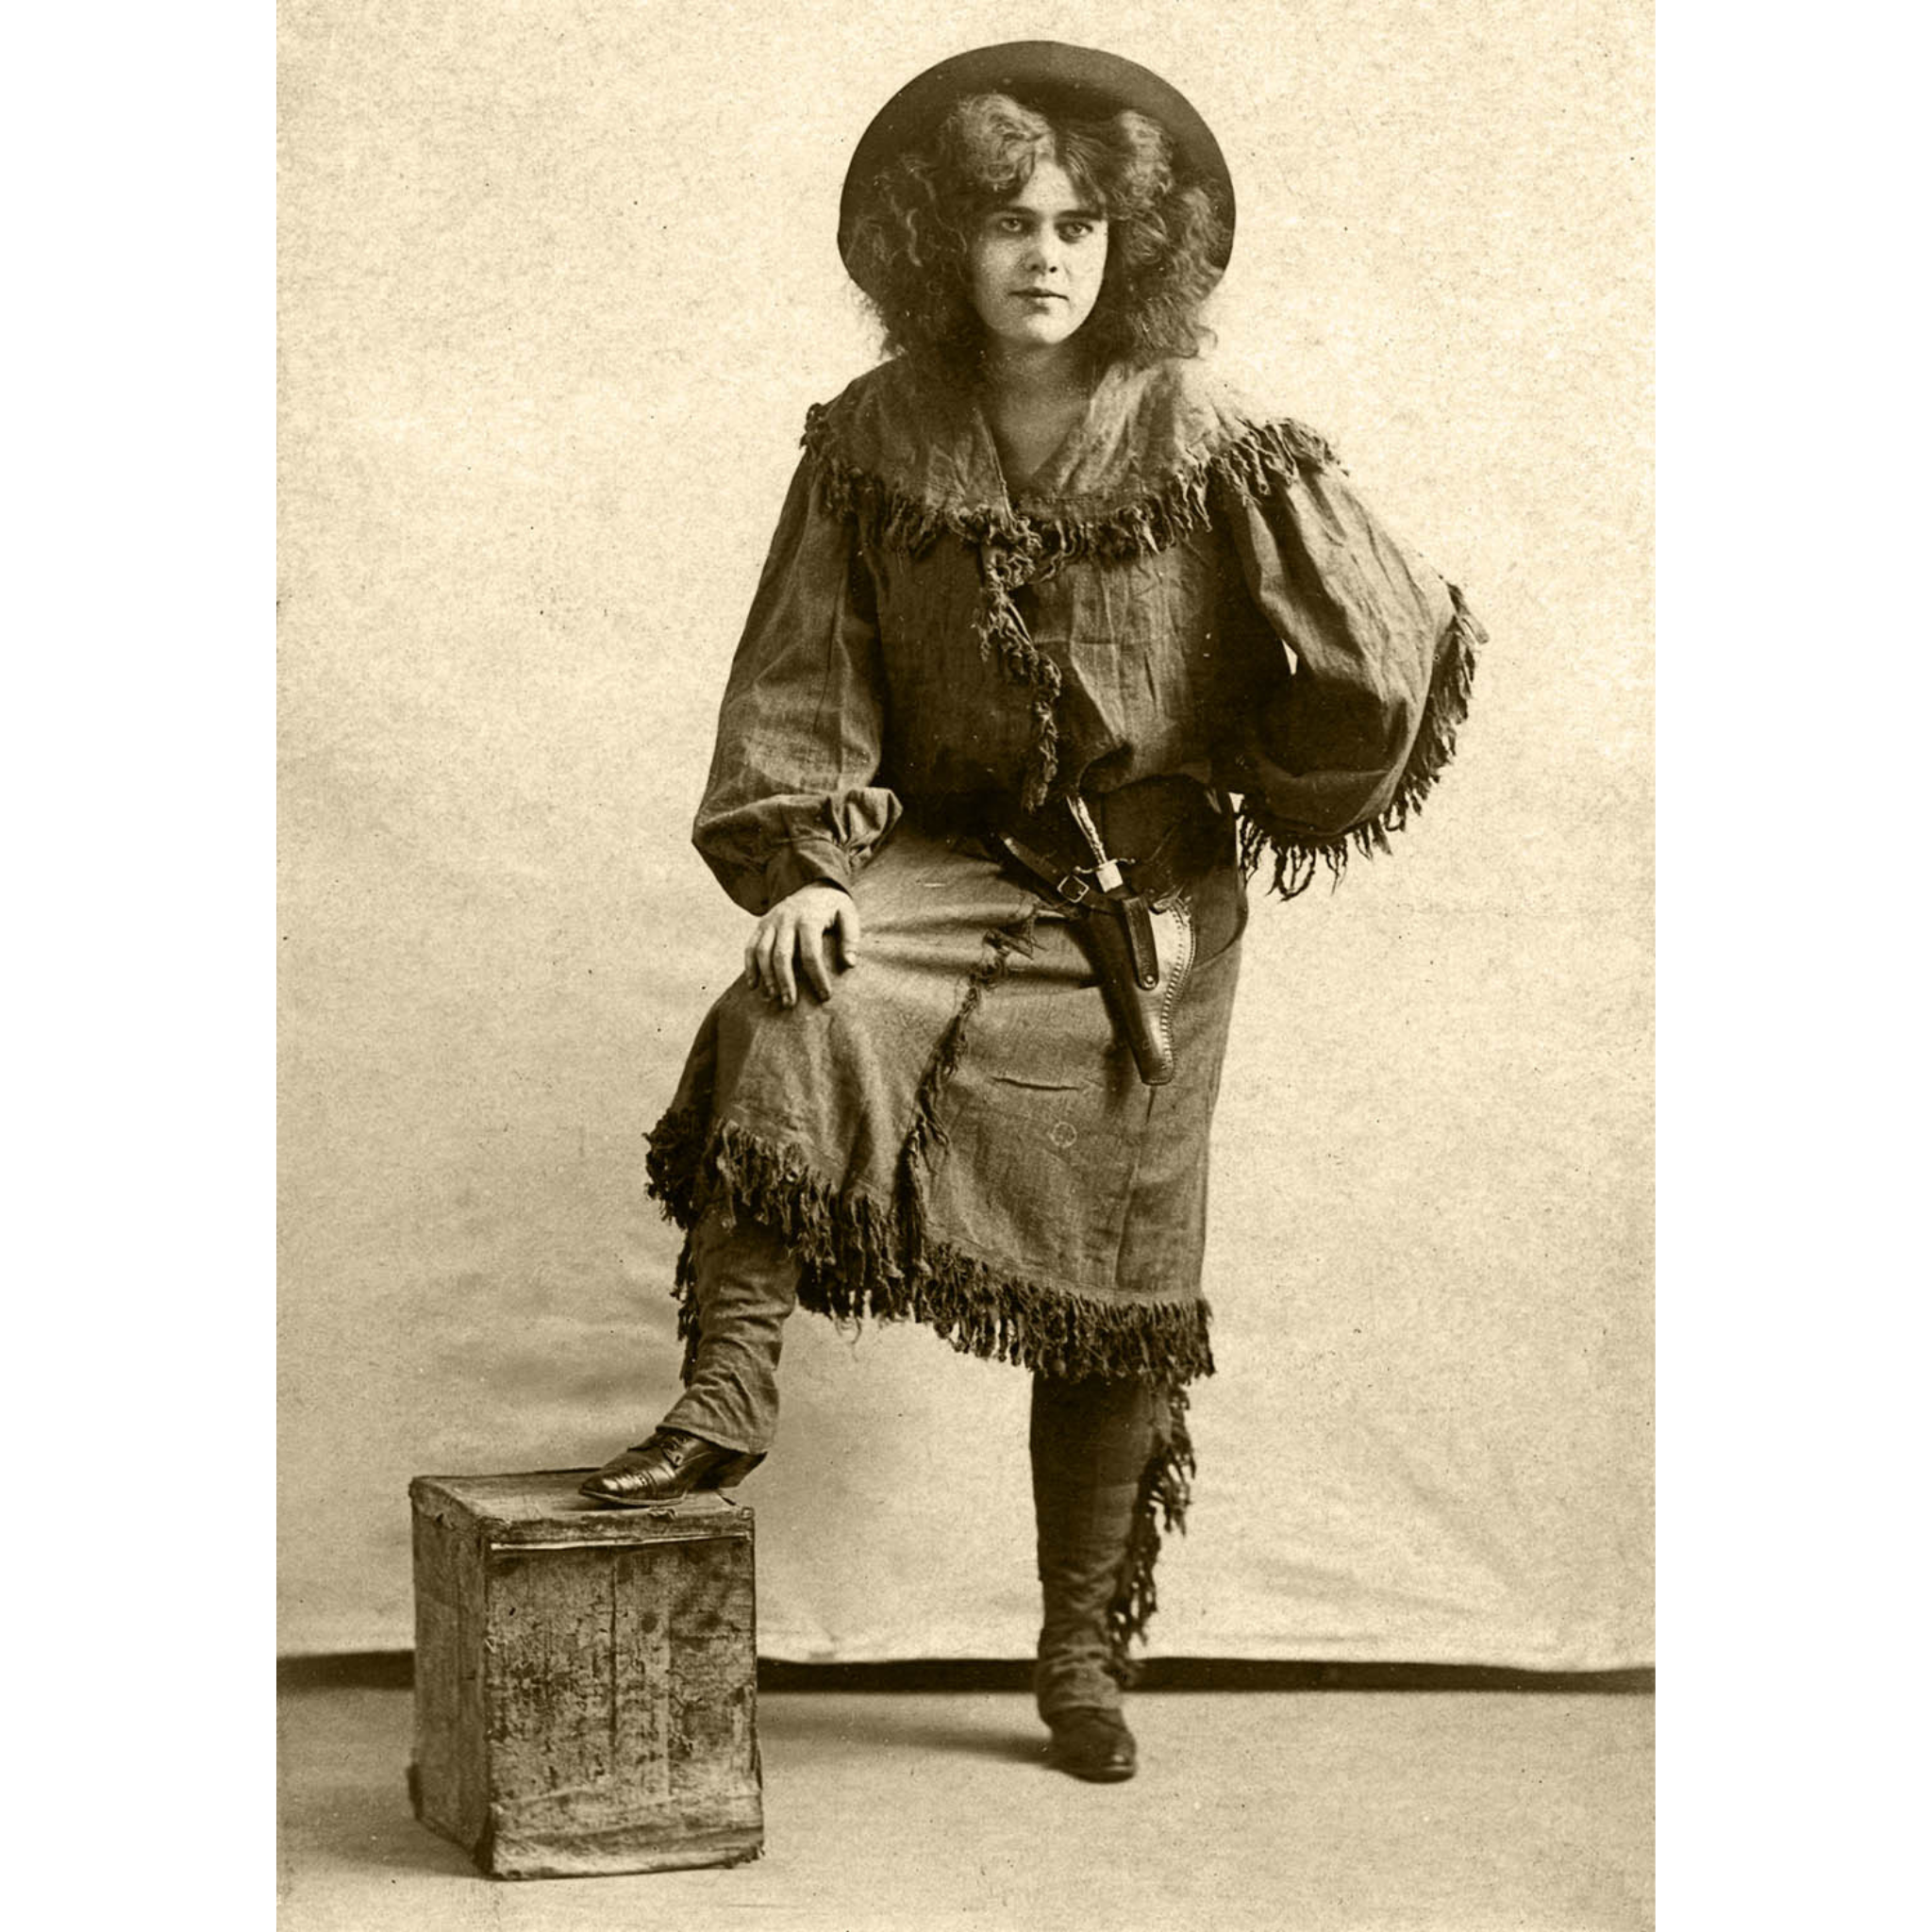 Cowgirl foot on Stool Knife in Holster - ca. 1915 Photograph